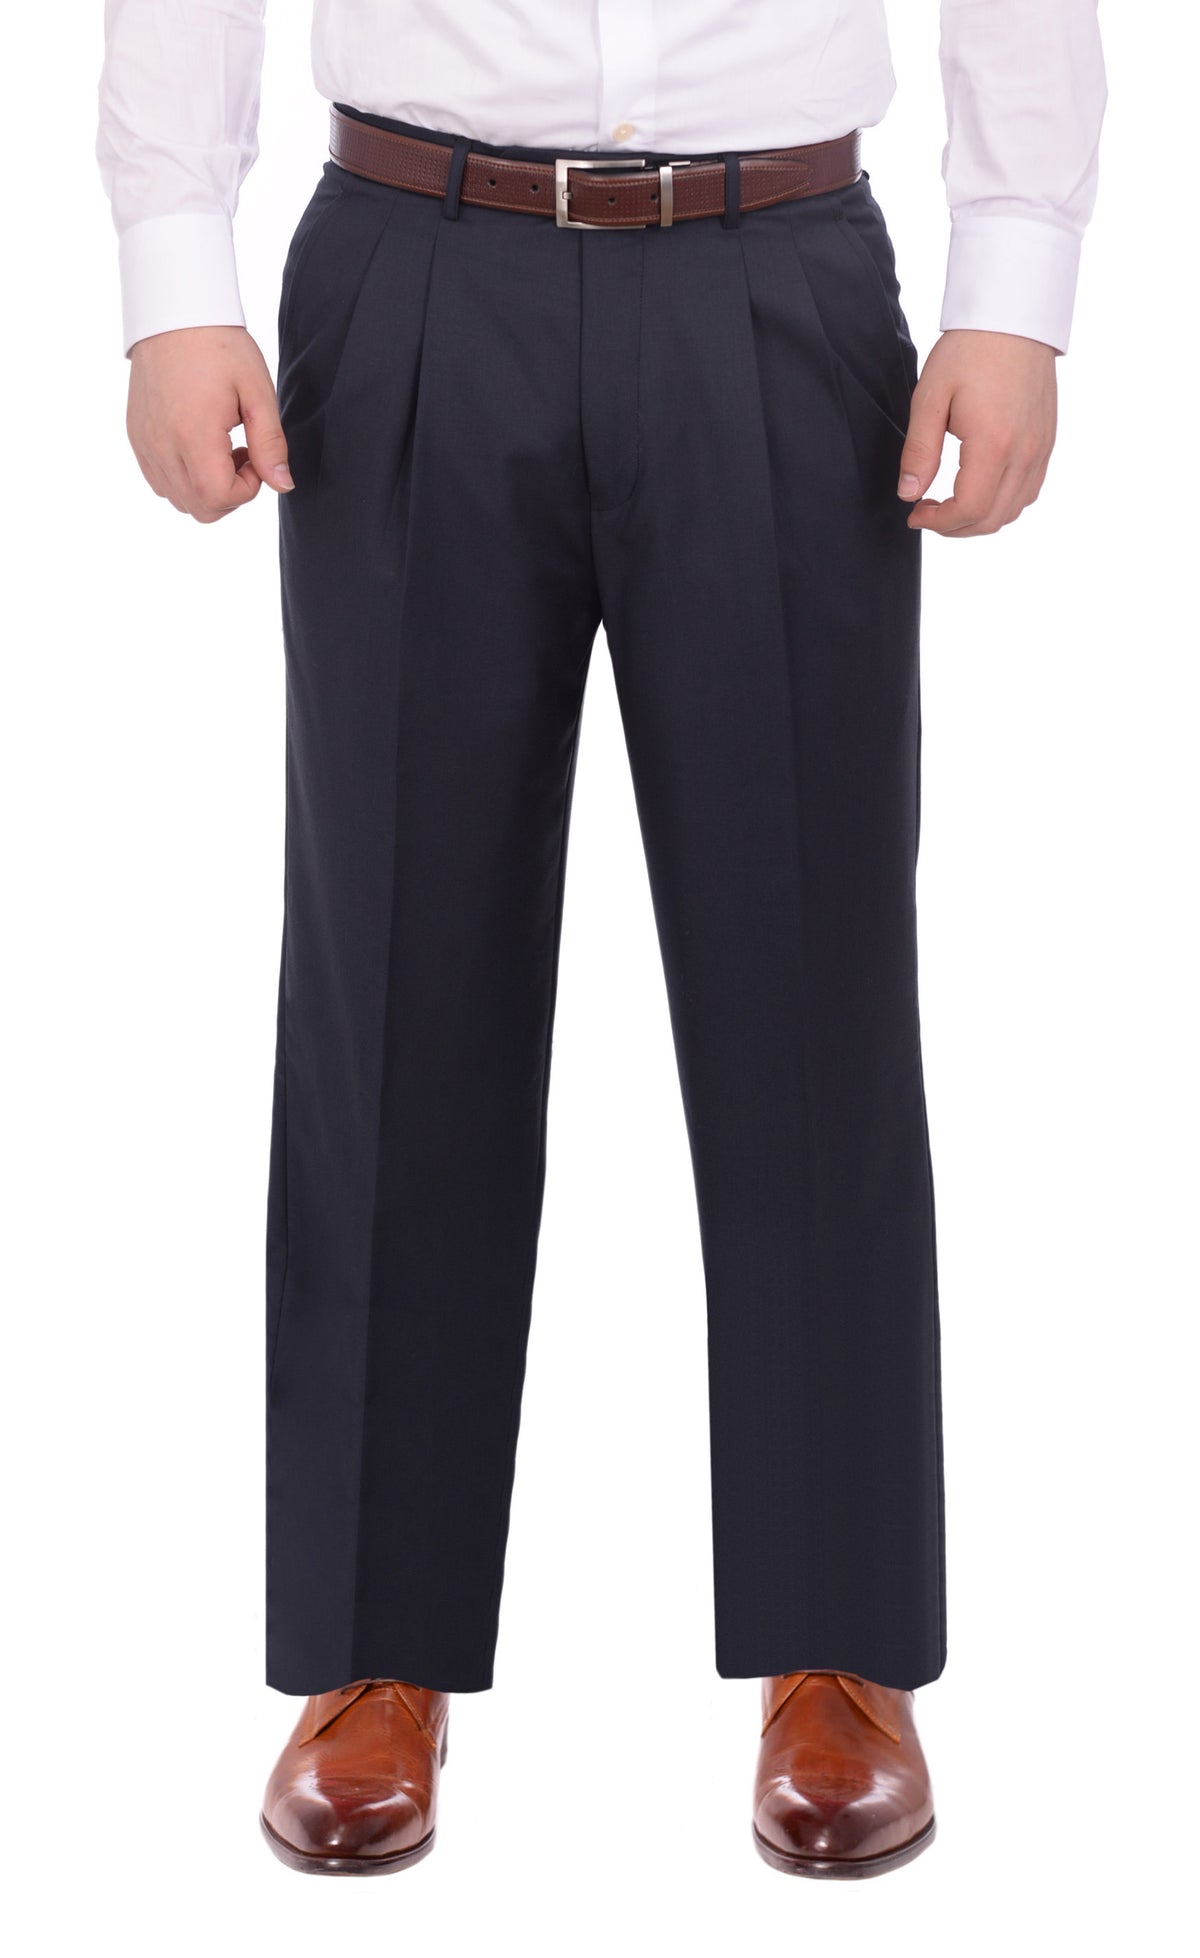 Armanno Uomo Regular Fit Solid Navy Blue Double Pleated Unhemmed Dress Pants